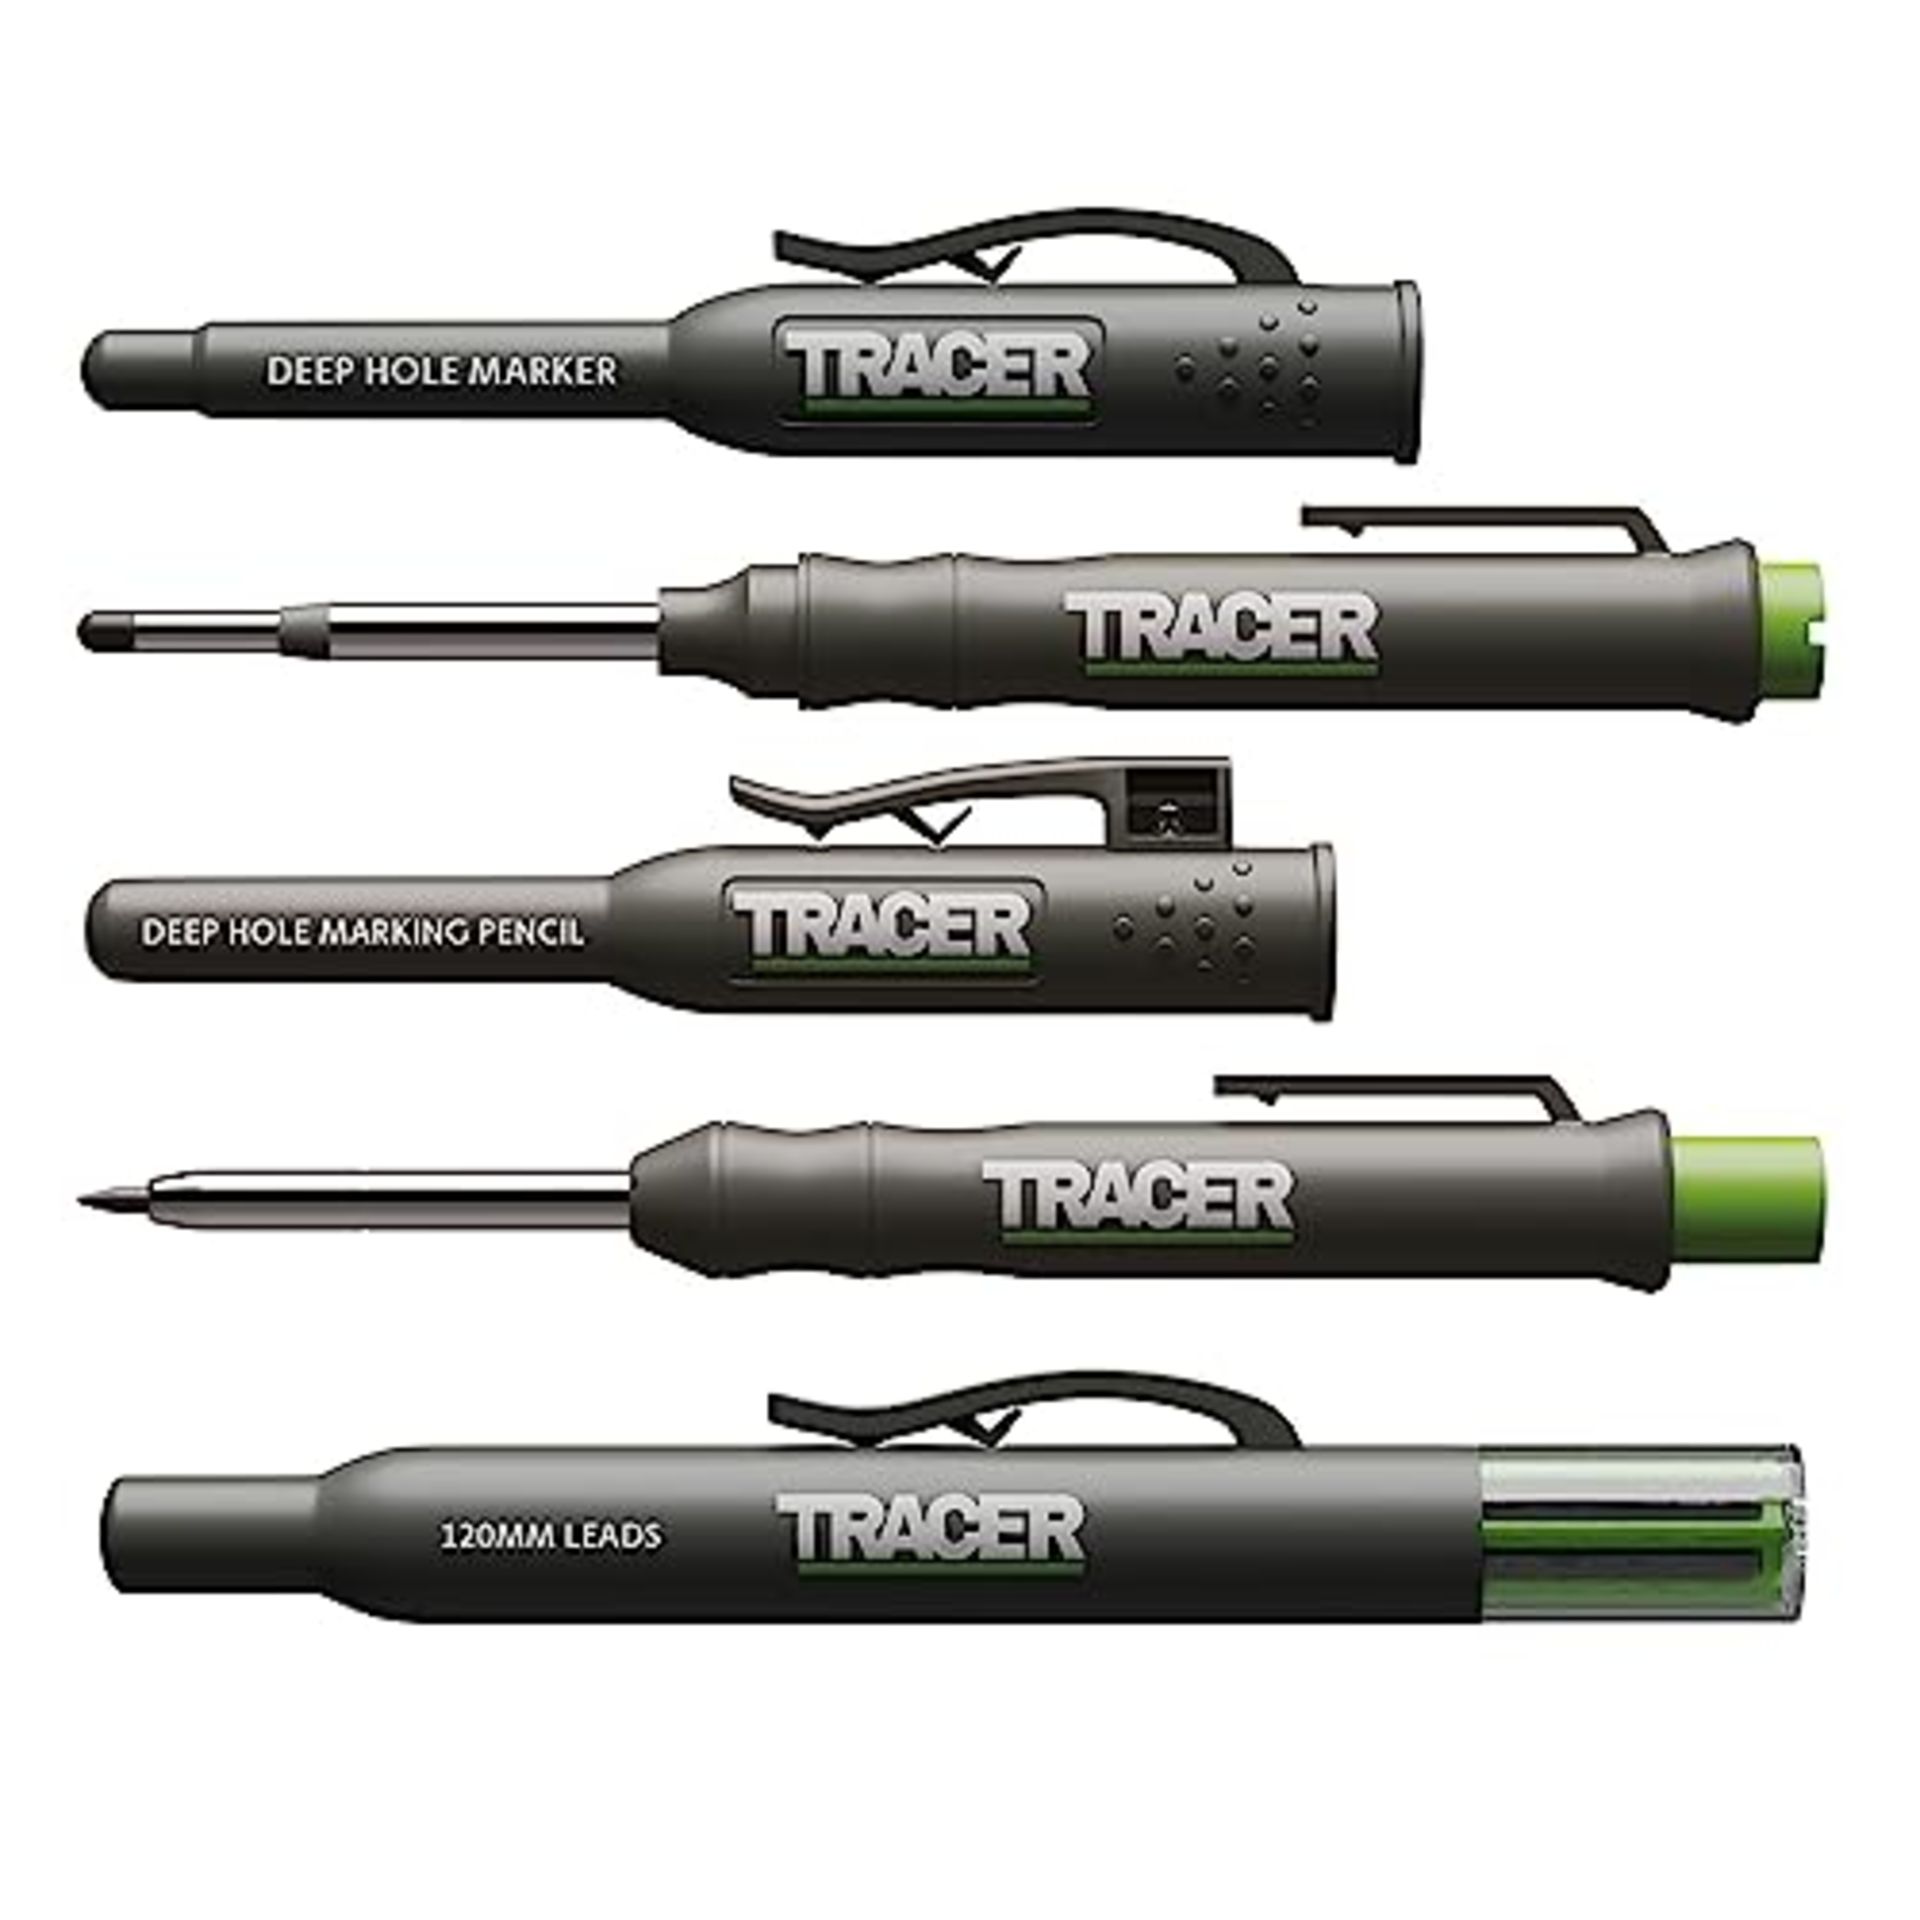 TRACER Complete Deep Hole Marking Kit - (including Double-Tipped Deep Hole Permanent M